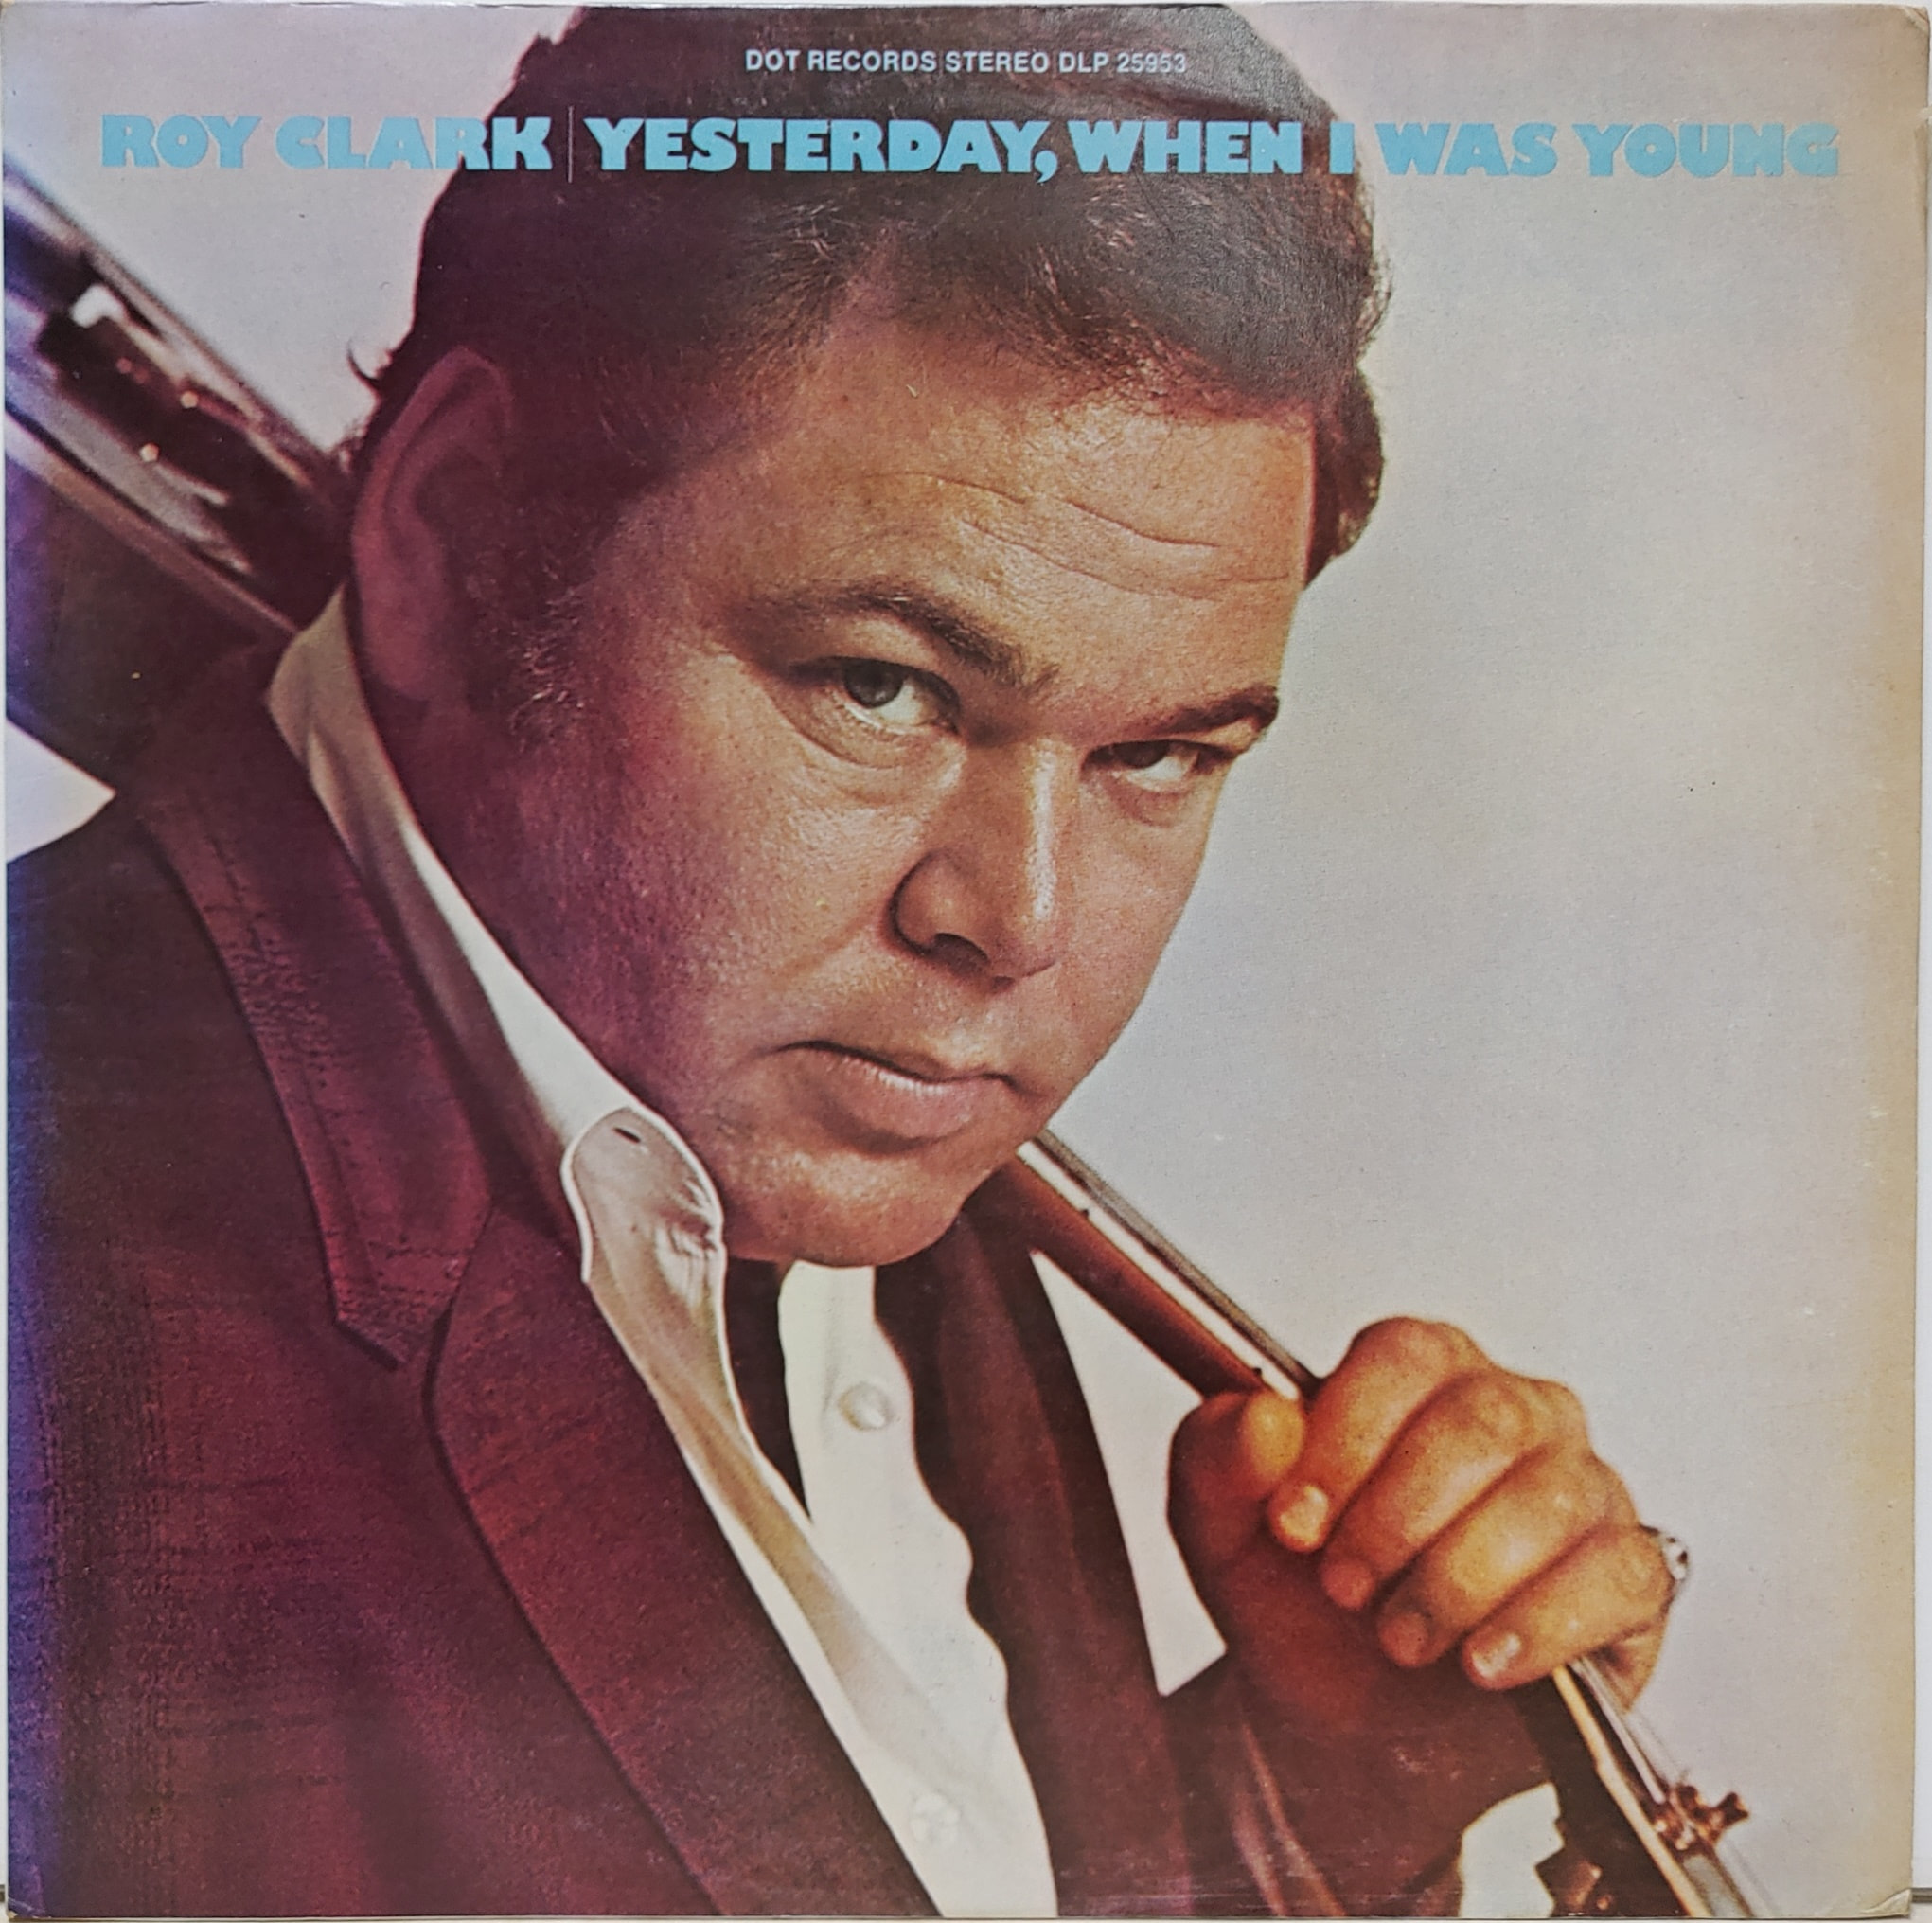 ROY CLARK / YESTERDAY, WHEN I WAS YOUNG